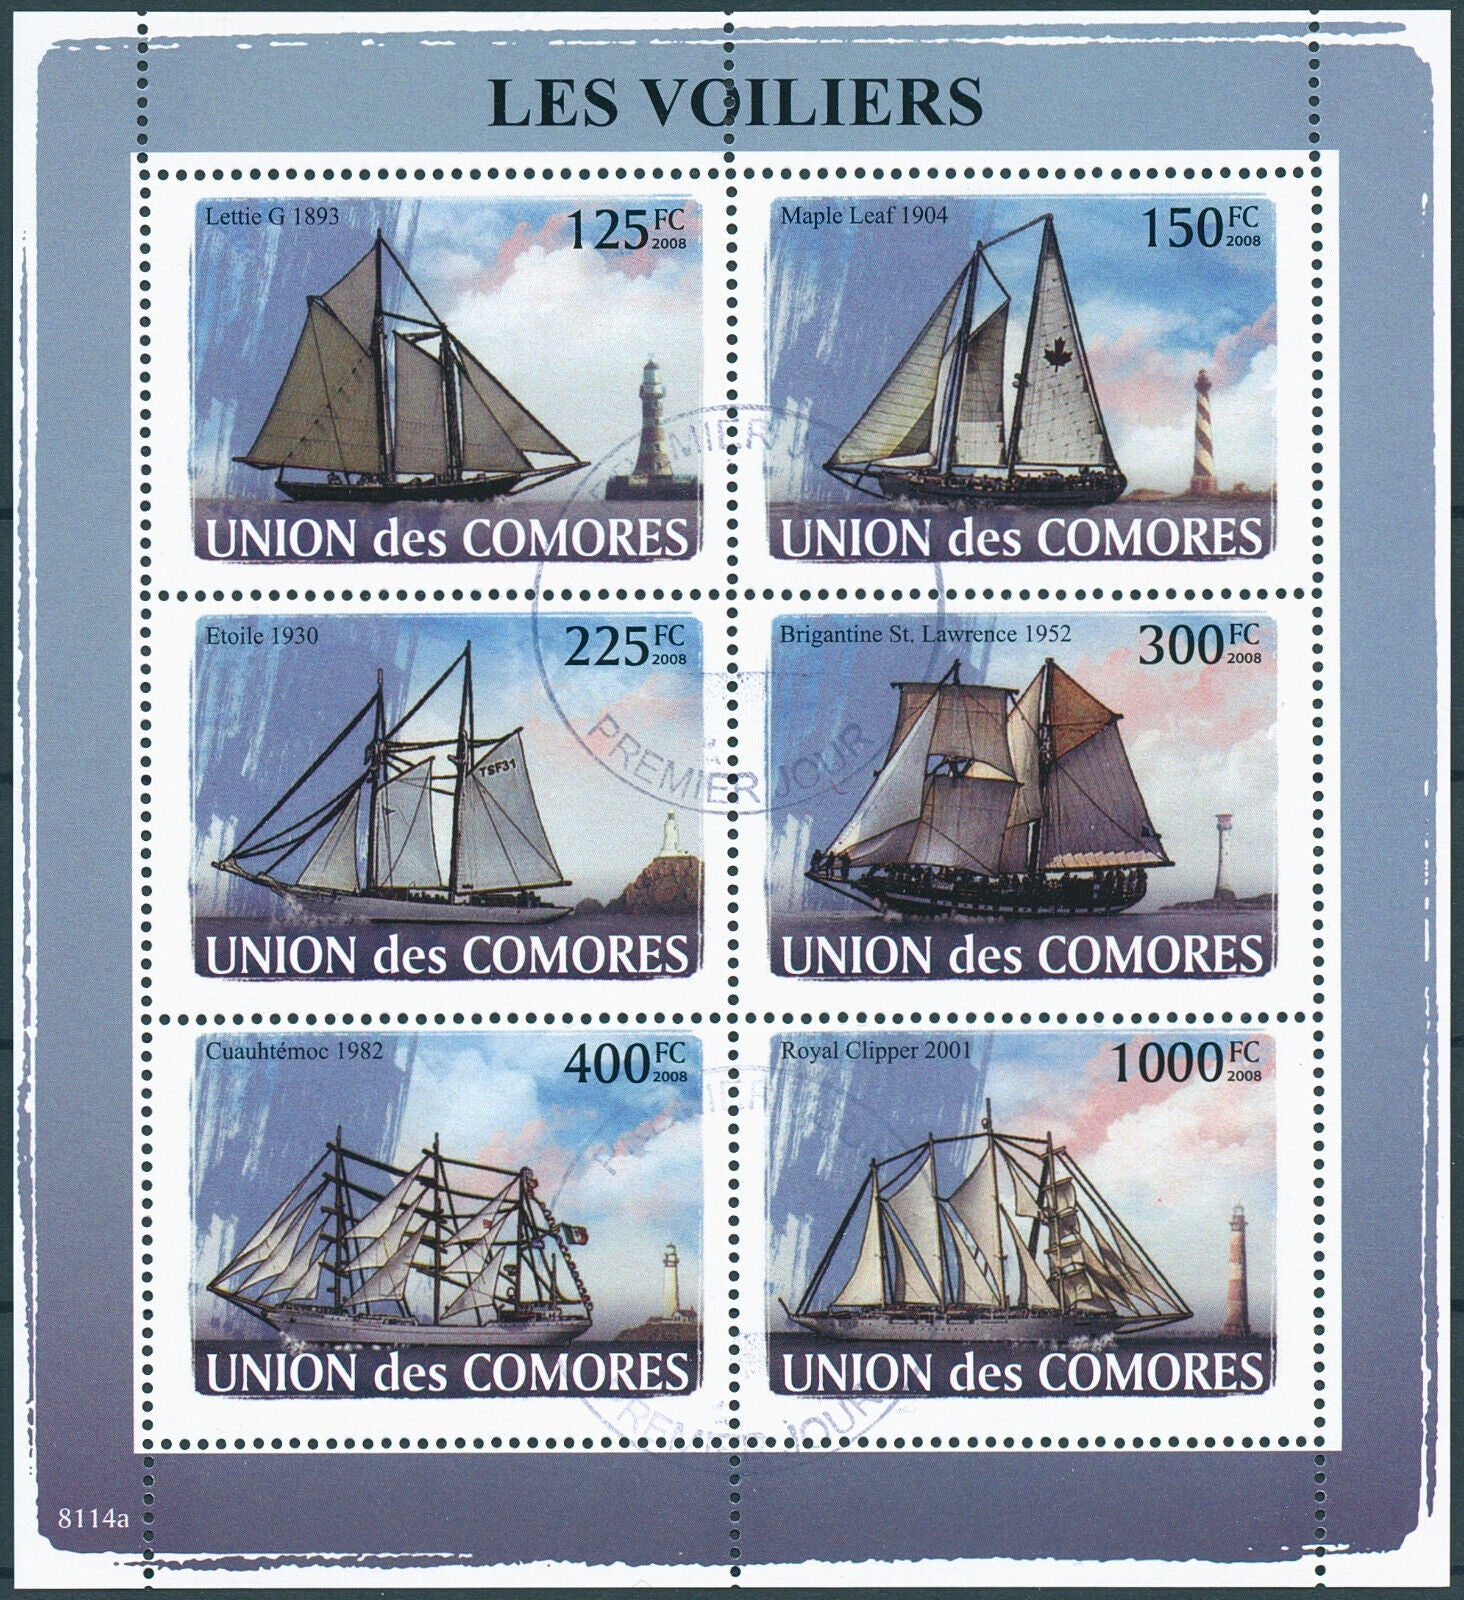 Comoros 2008 CTO Tall Ships Stamps Nautical Lettie G Royal Clipper 6v M/S